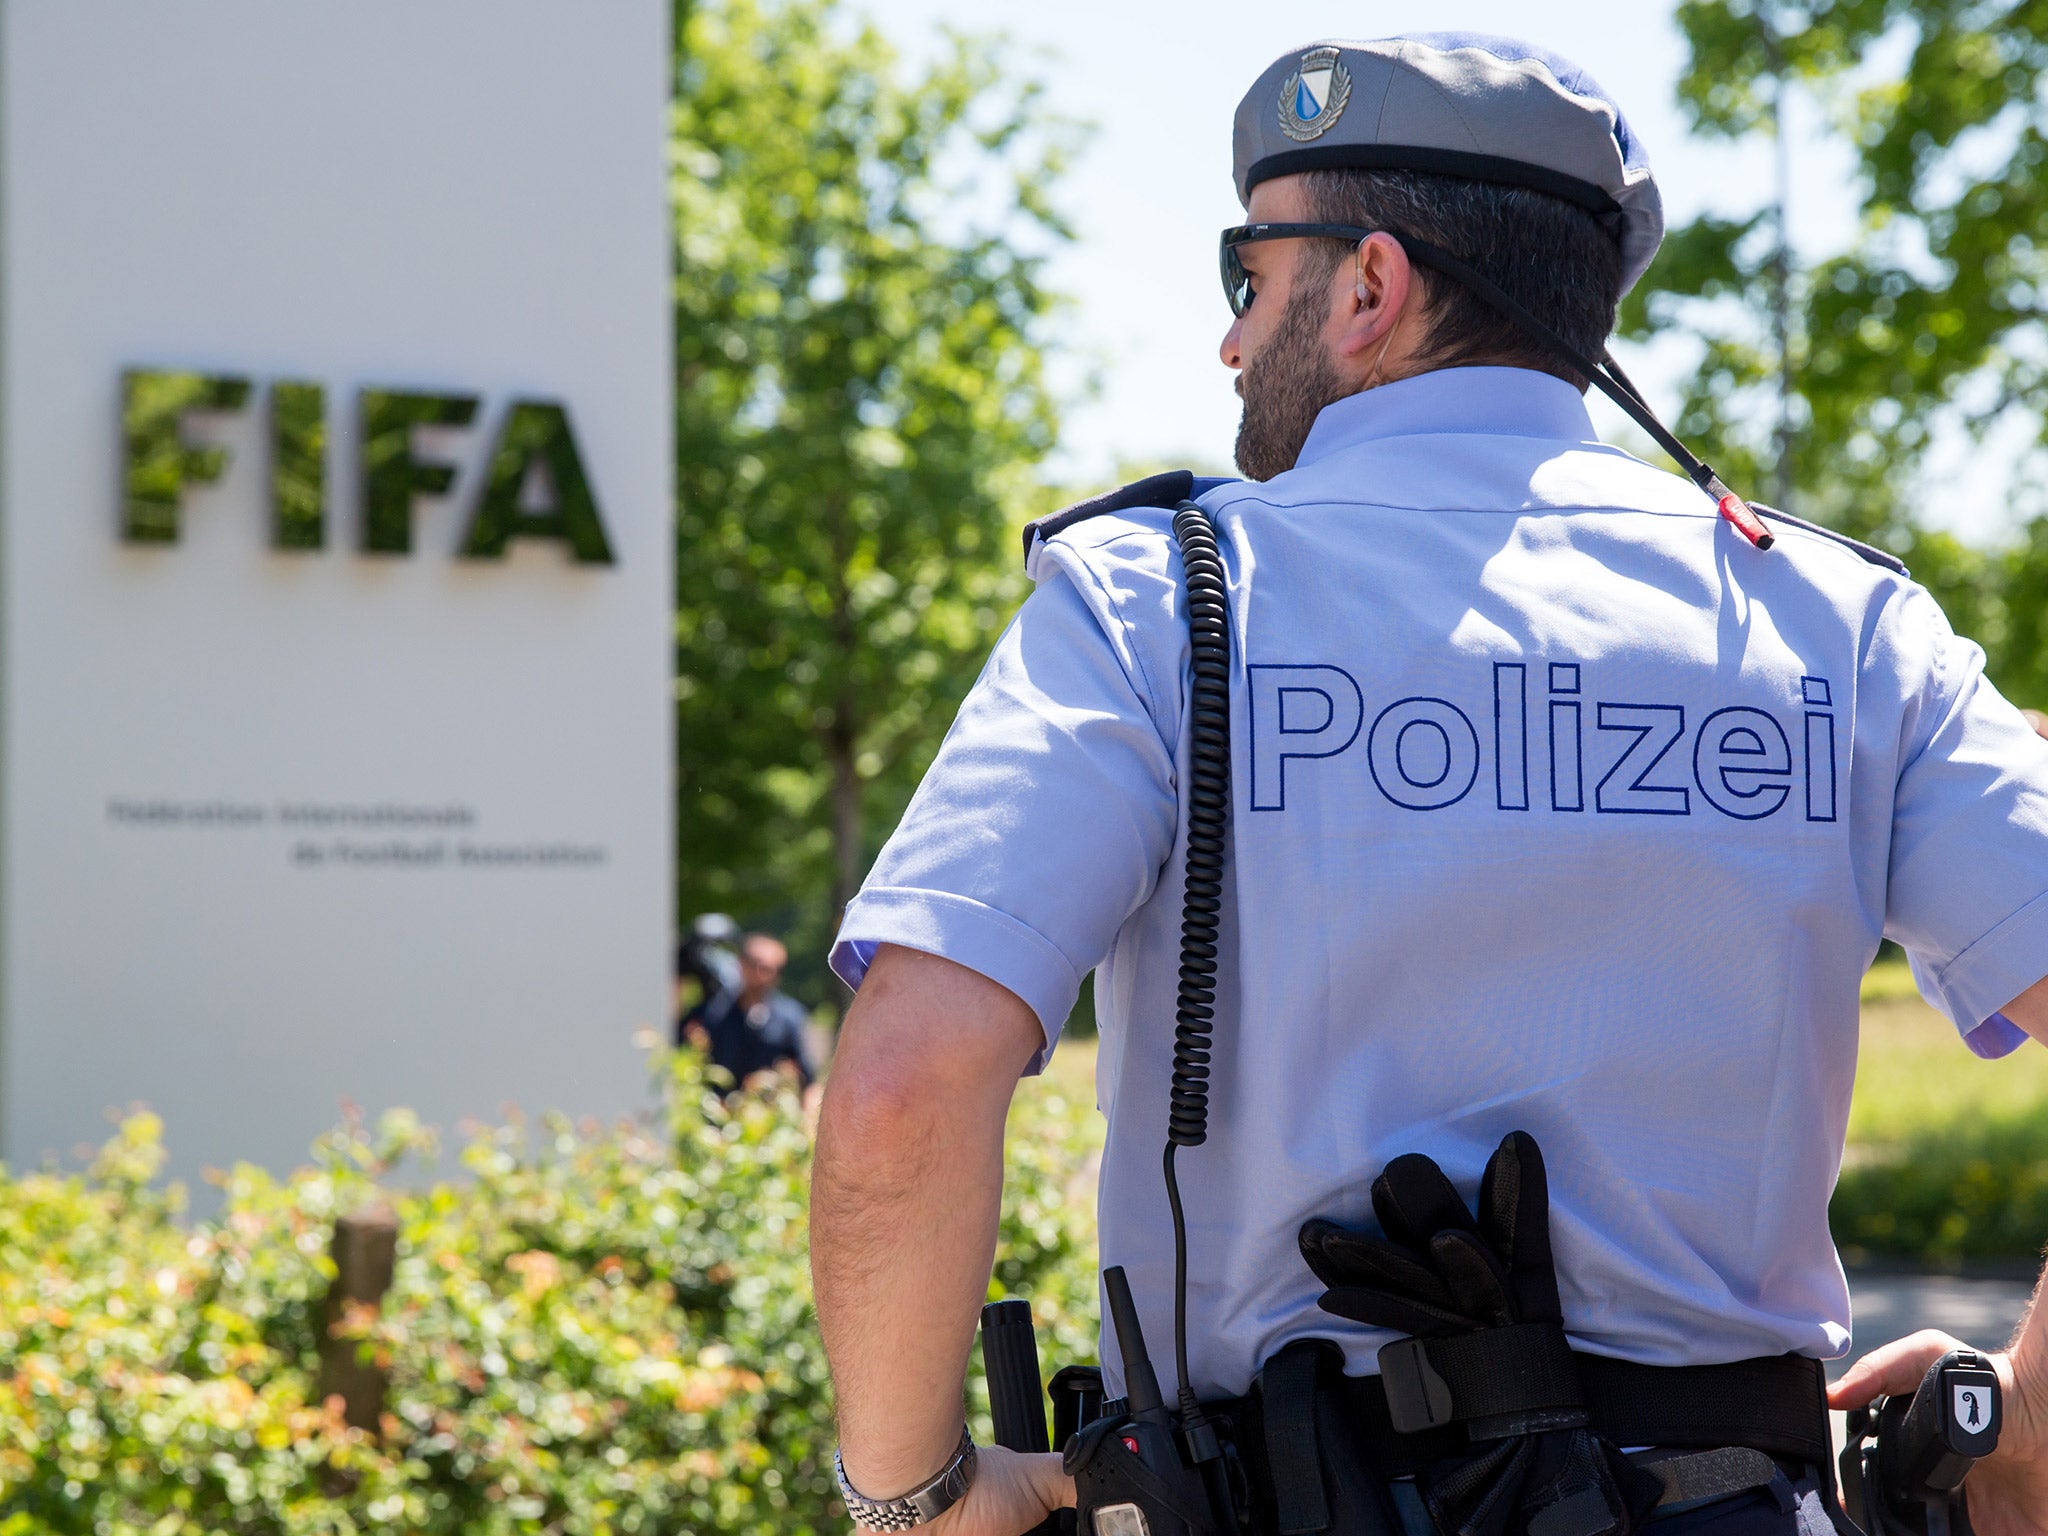 A police officer stands outside Fifa HQ in Zurich